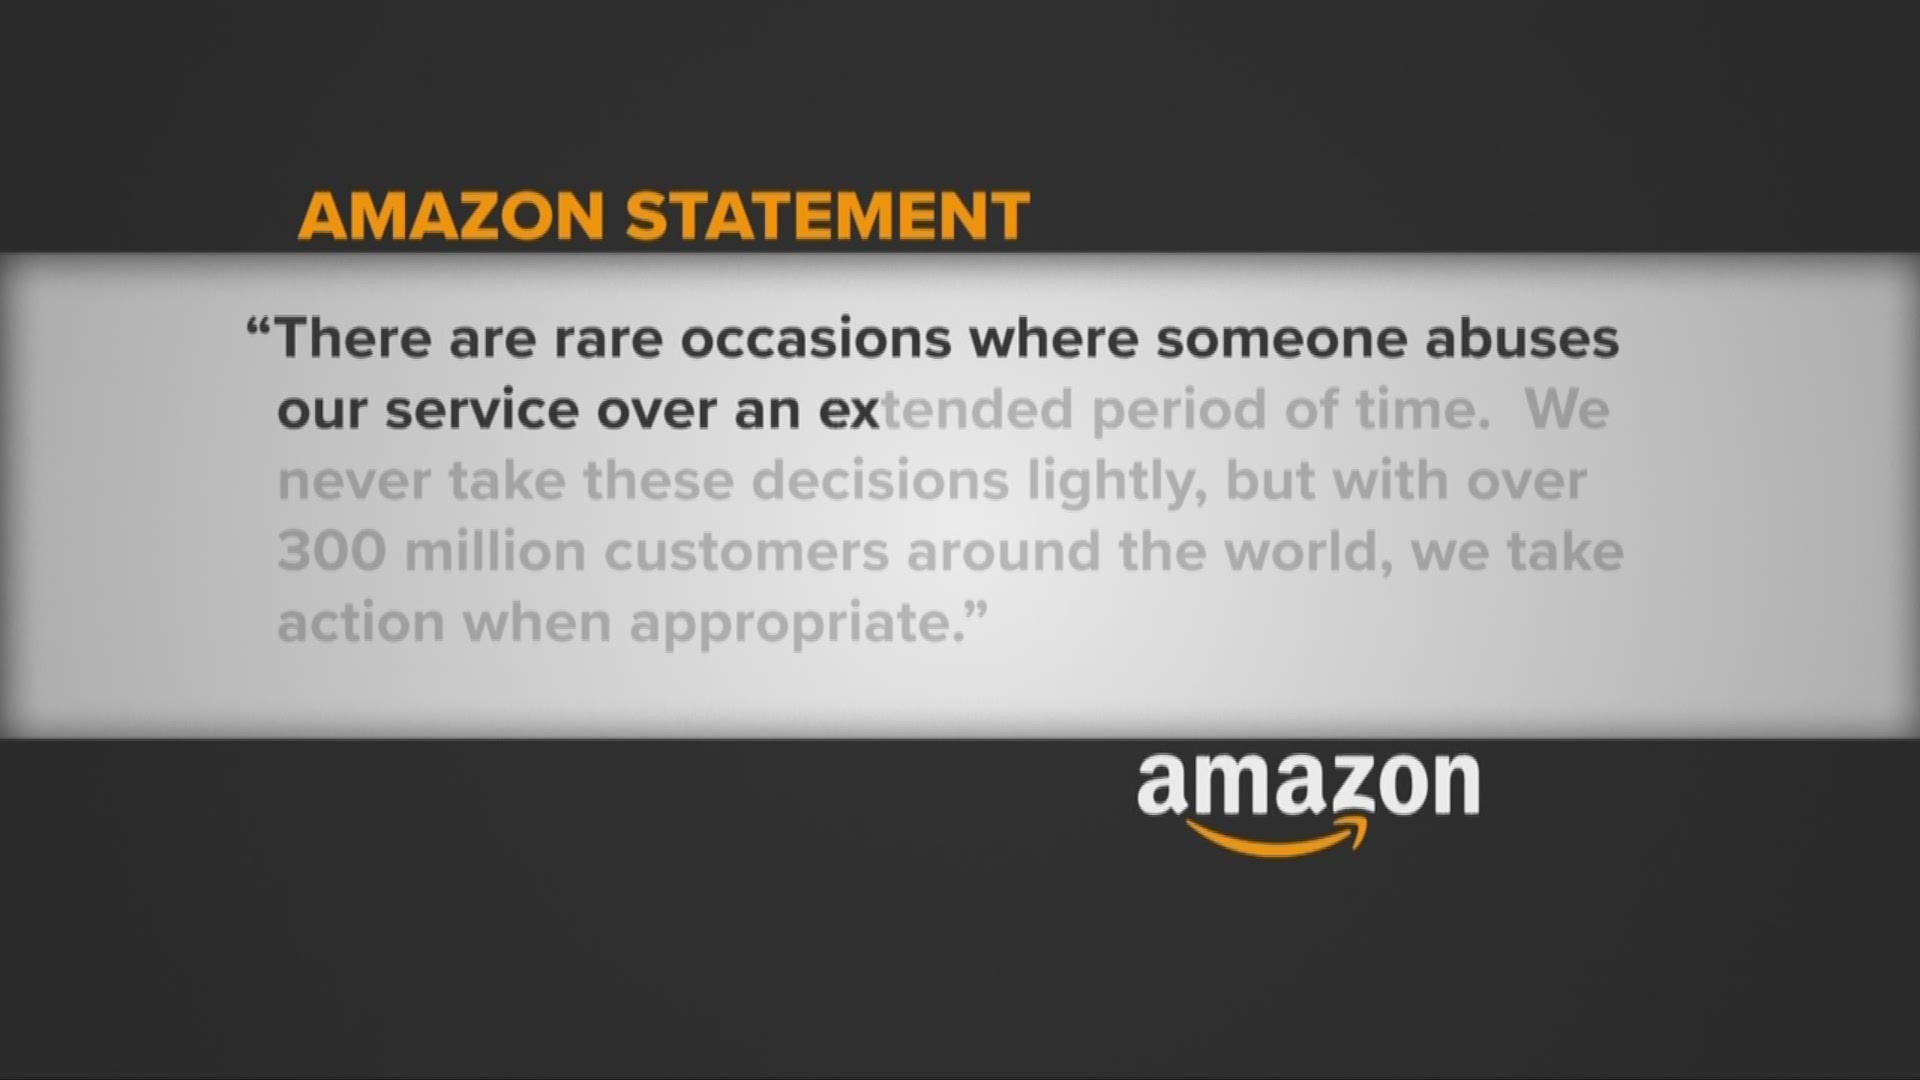 Amazon can blacklist customers that make too many returns